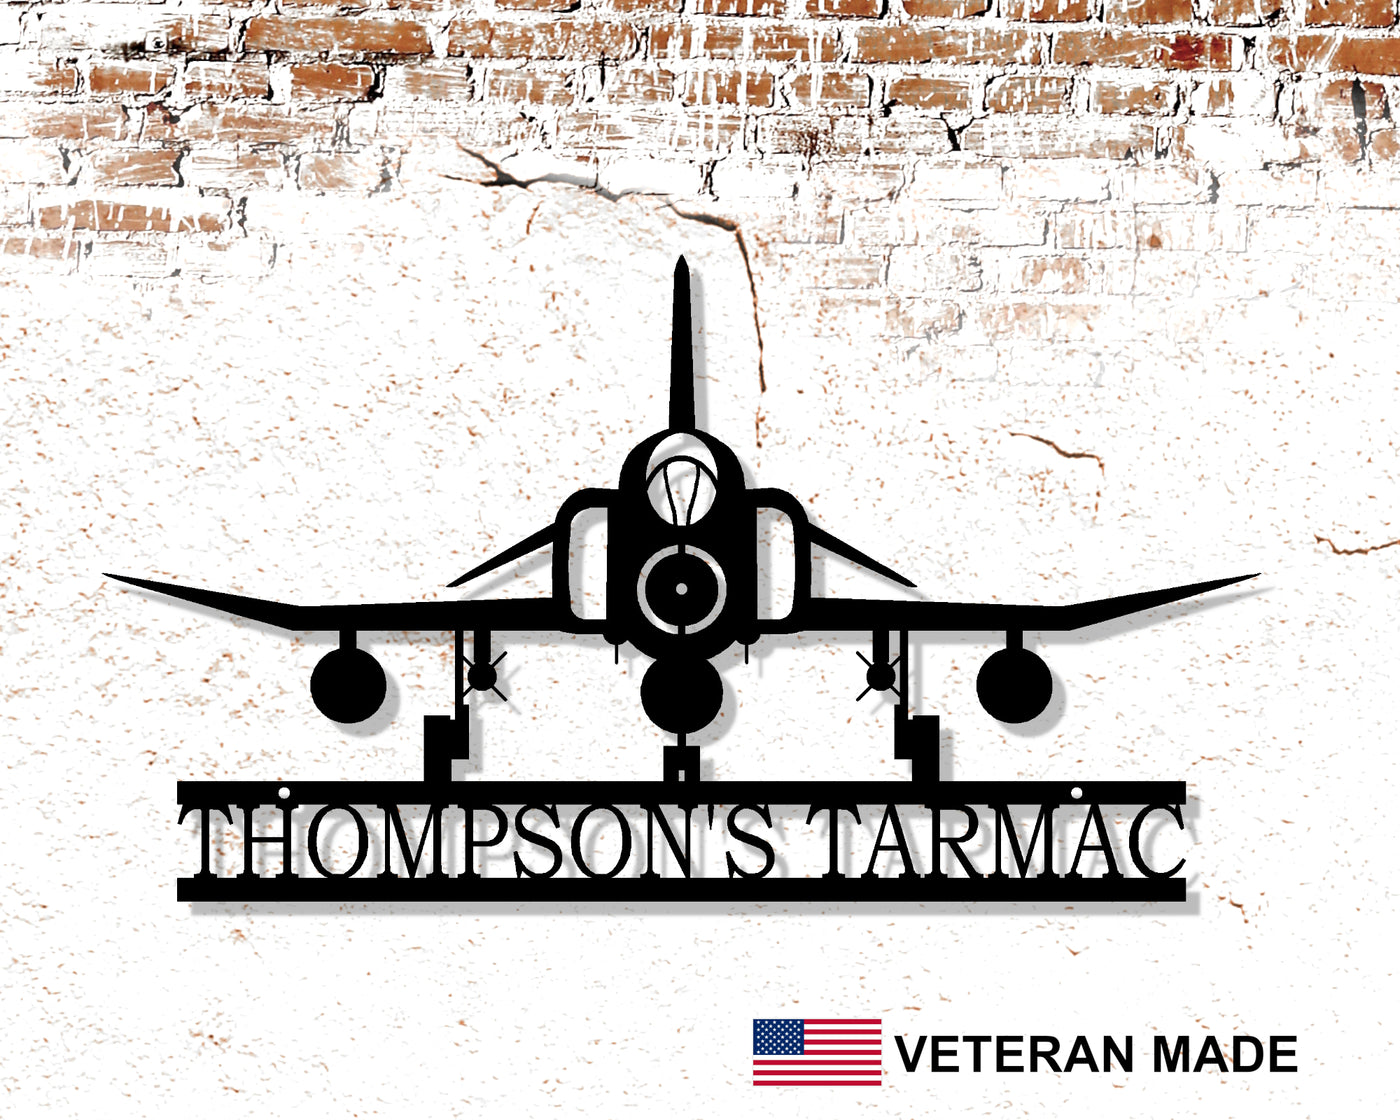 Personalized F-4 Phantom Aircraft Metal Sign - Madison Iron and Wood - Personalized sign - metal outdoor decor - Steel deocrations - american made products - veteran owned business products - fencing decorations - fencing supplies - custom wall decorations - personalized wall signs - steel - decorative post caps - steel post caps - metal post caps - brackets - structural brackets - home improvement - easter - easter decorations - easter gift - easter yard decor